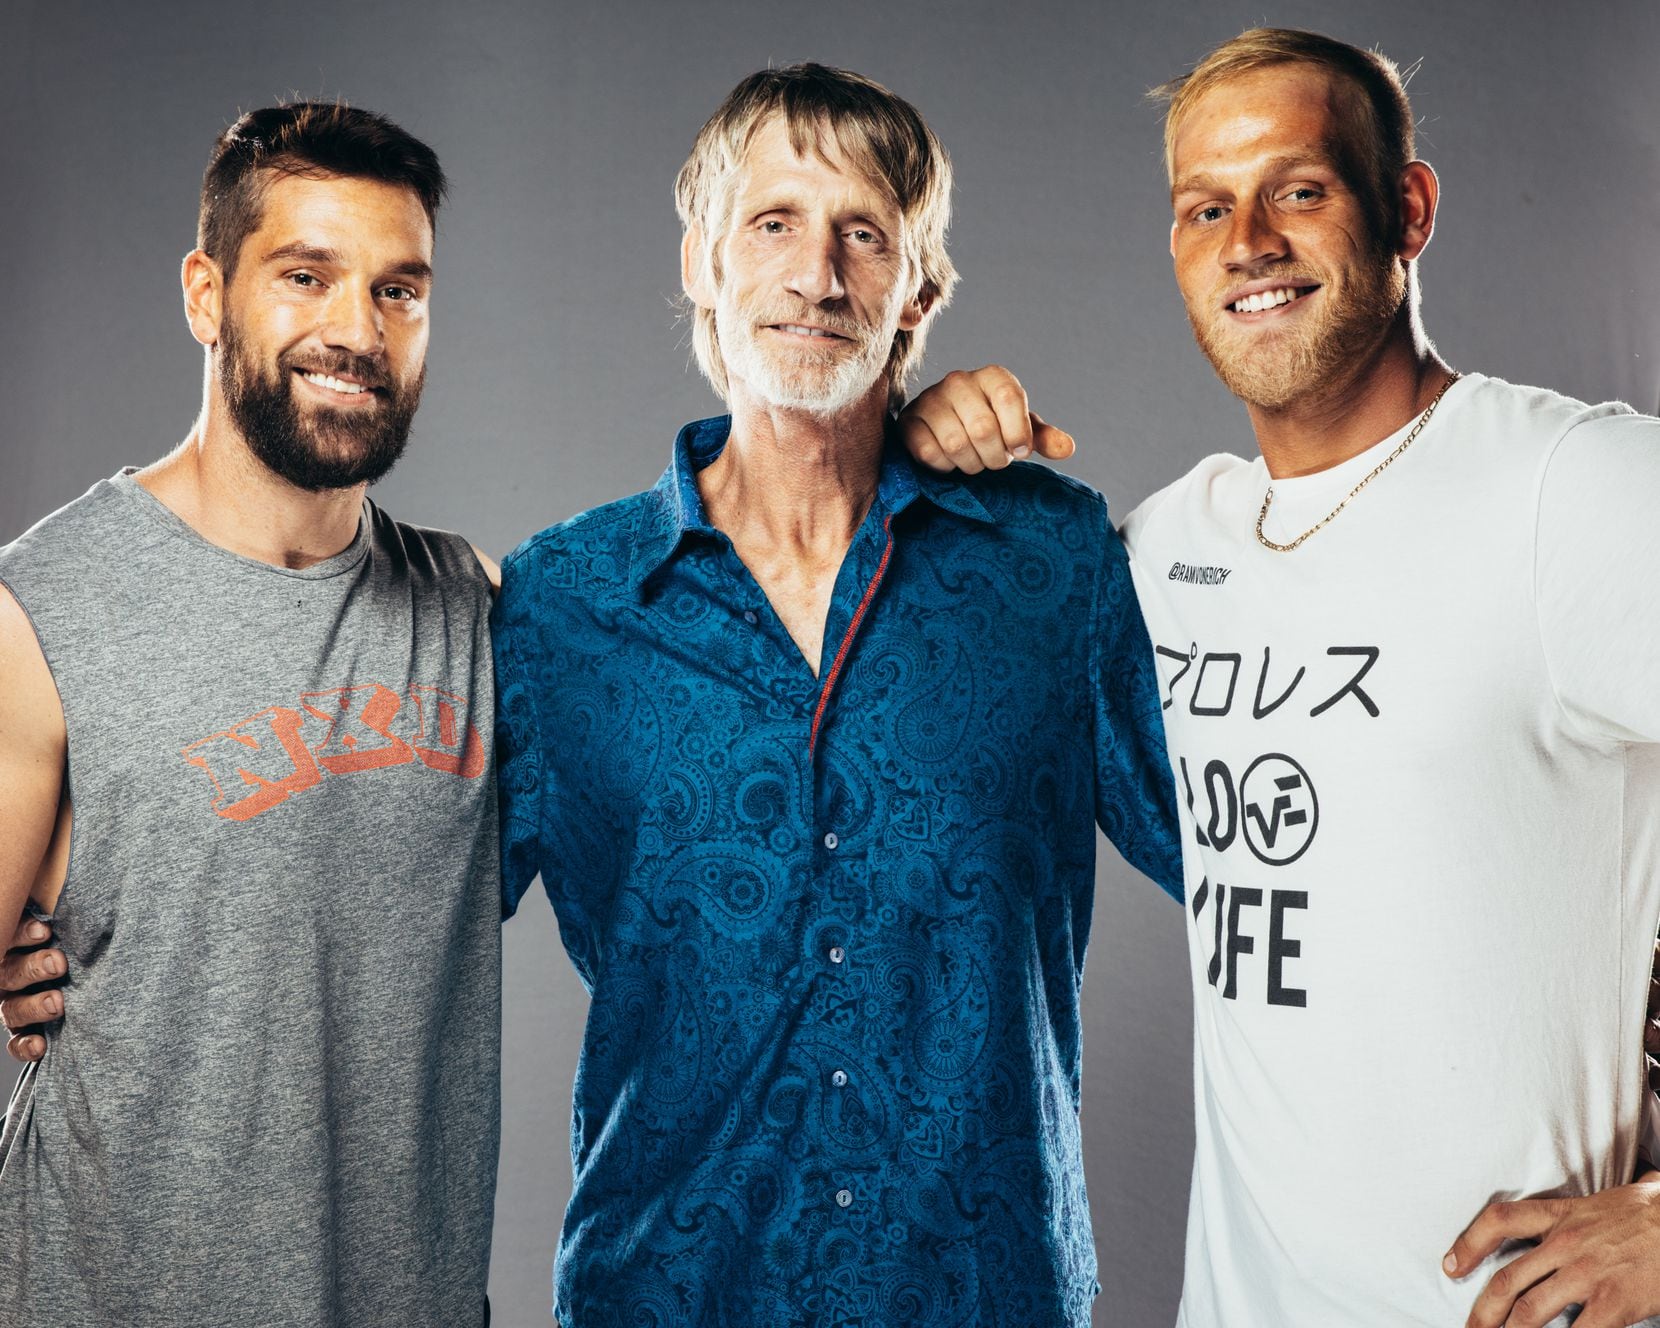 Ross (left) and Marshall (right) pose with their father Kevin Von Erich (middle). Courtesy: MLW